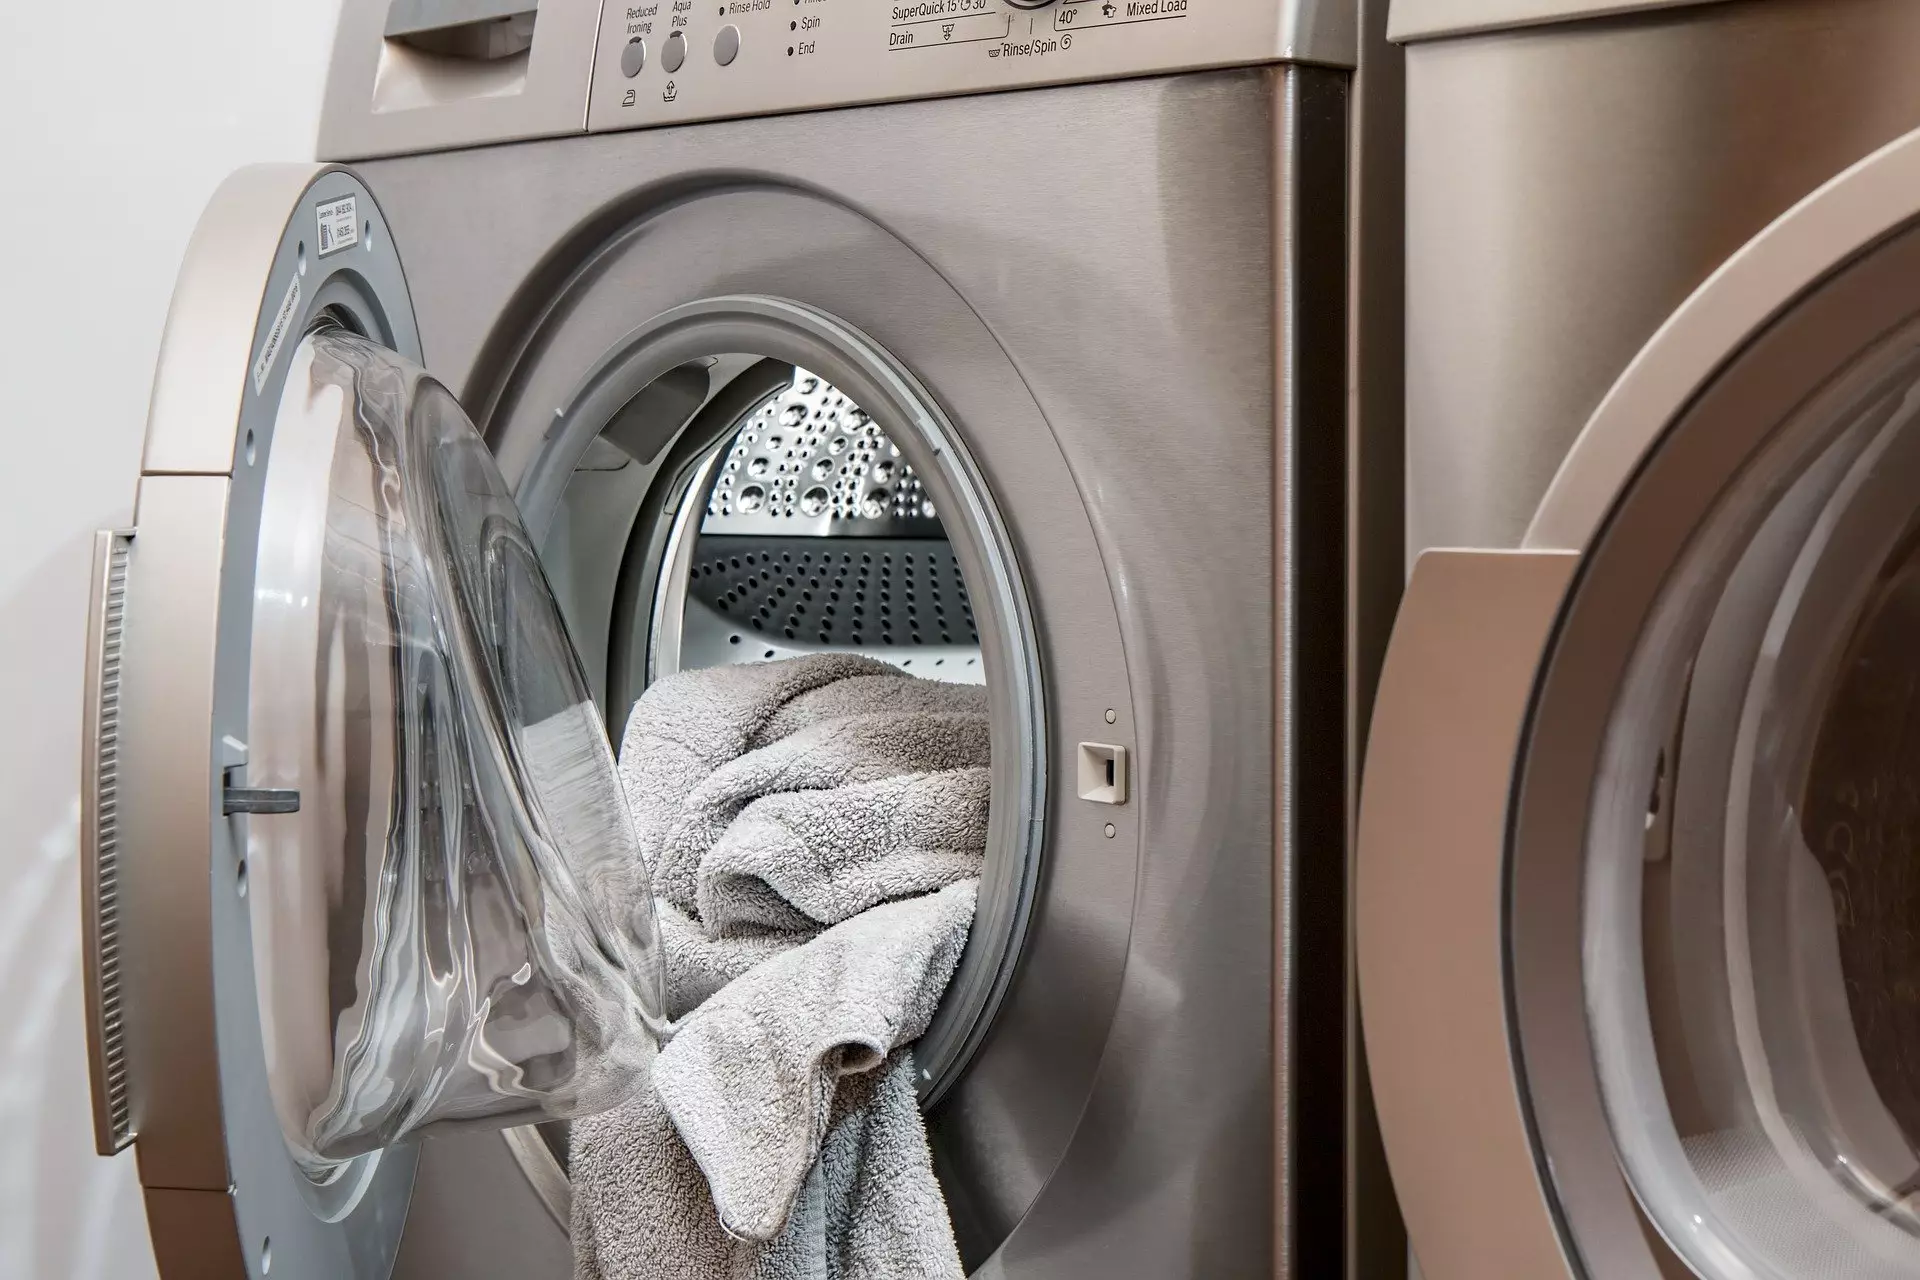 Aldi's air dryer is perfect for those without a washer/dryer (